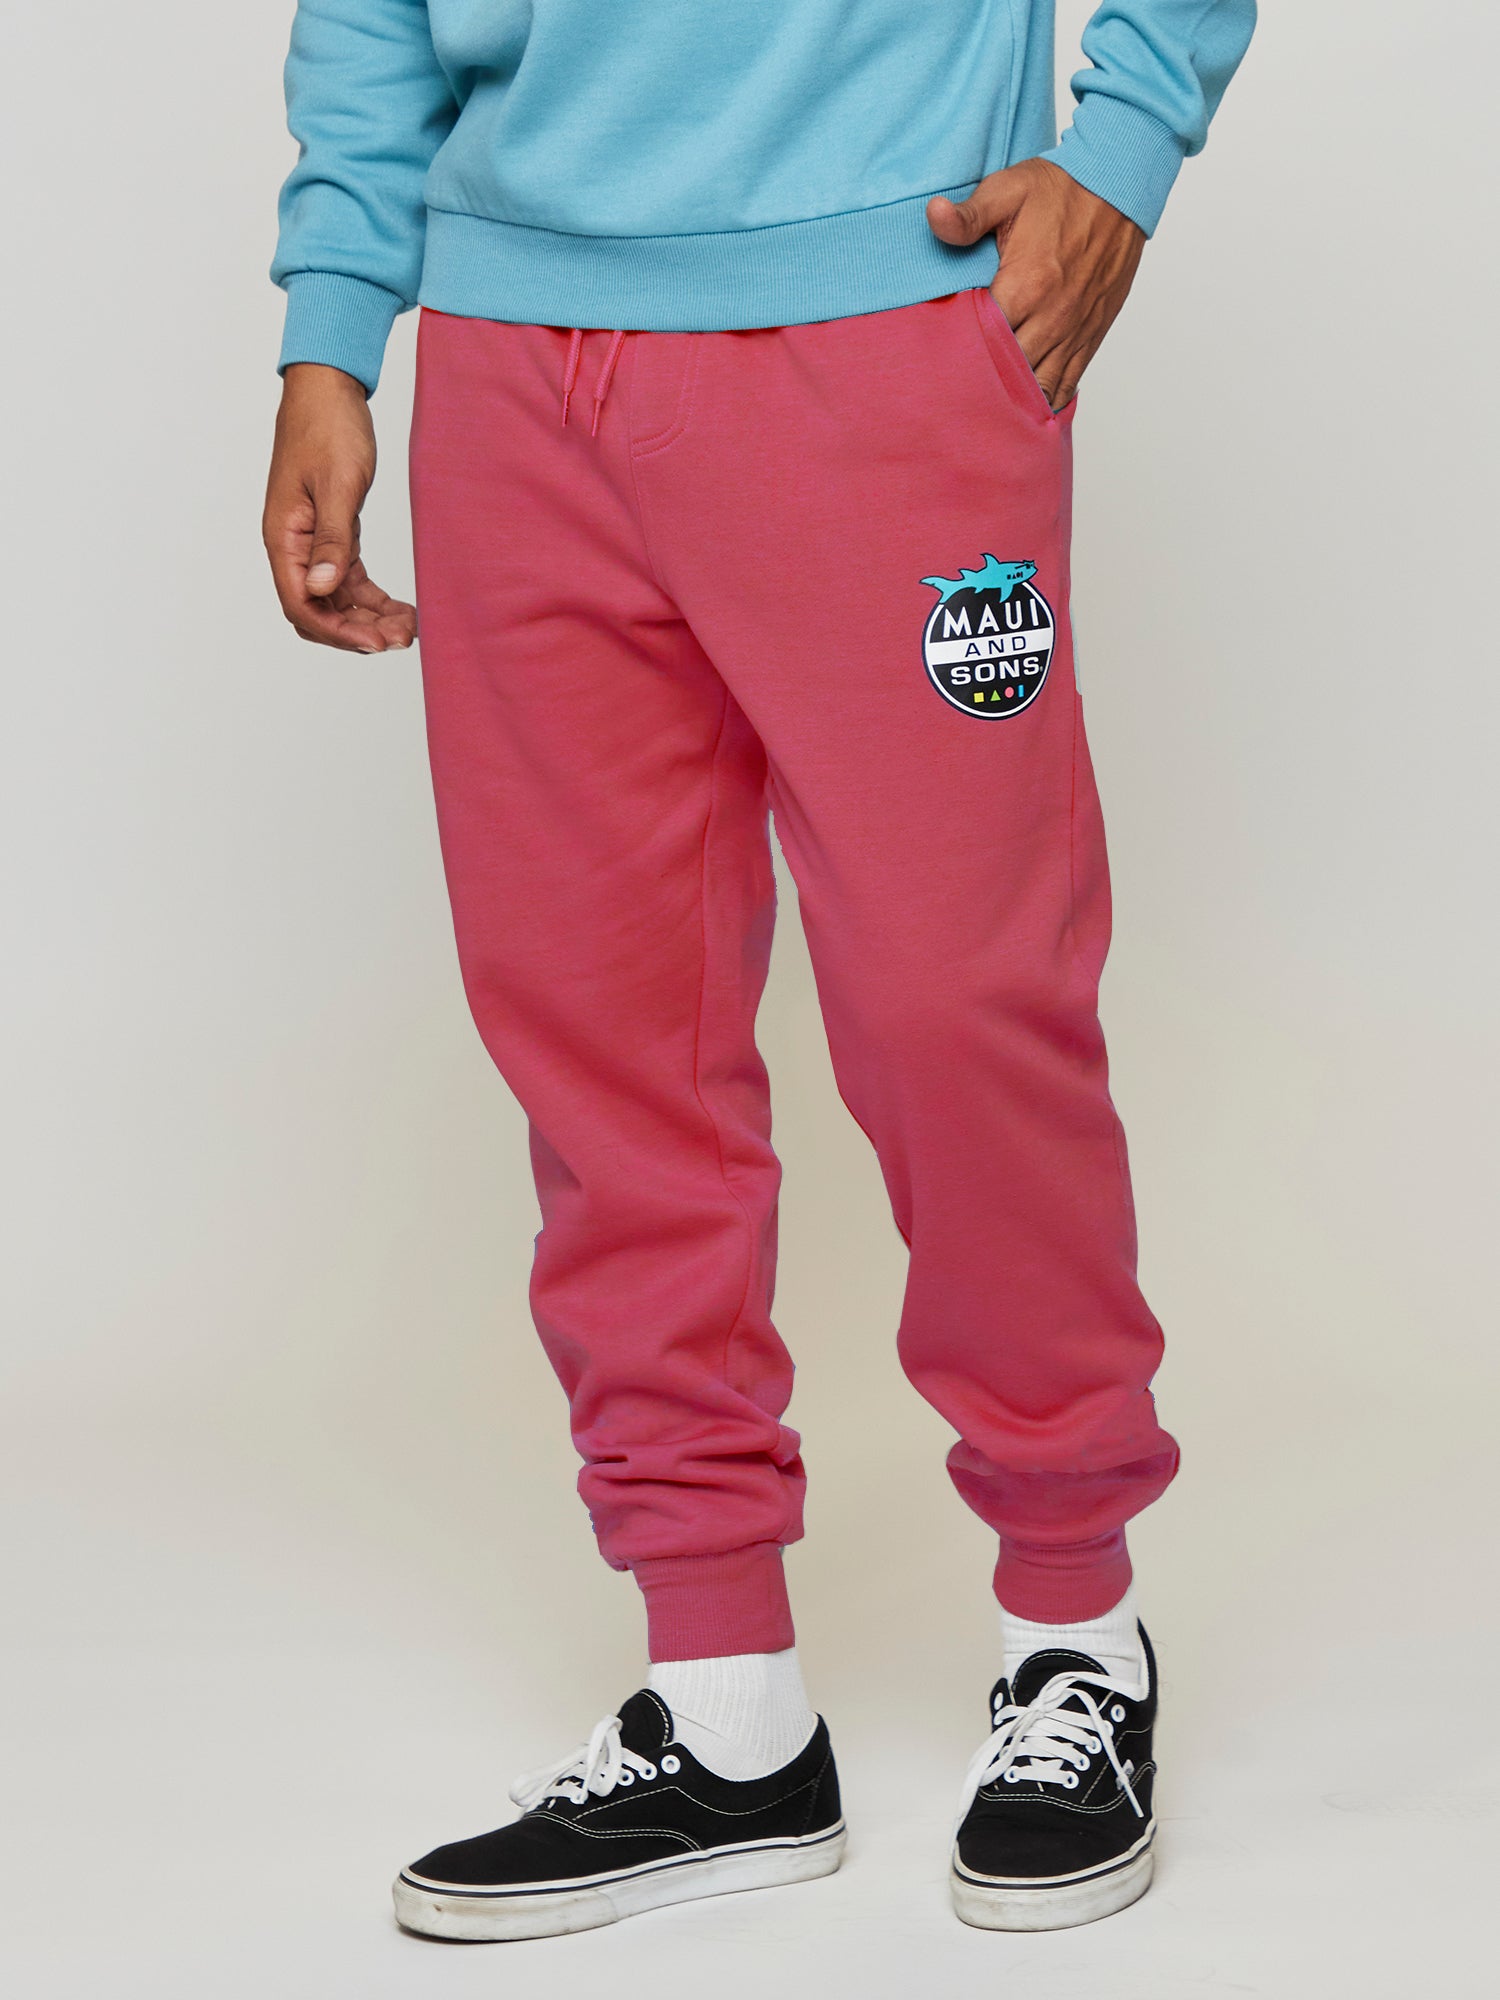 Pink Dolphin, Pants, Pink Dolphin Mens Wave Activewear Jogger Sweatpants